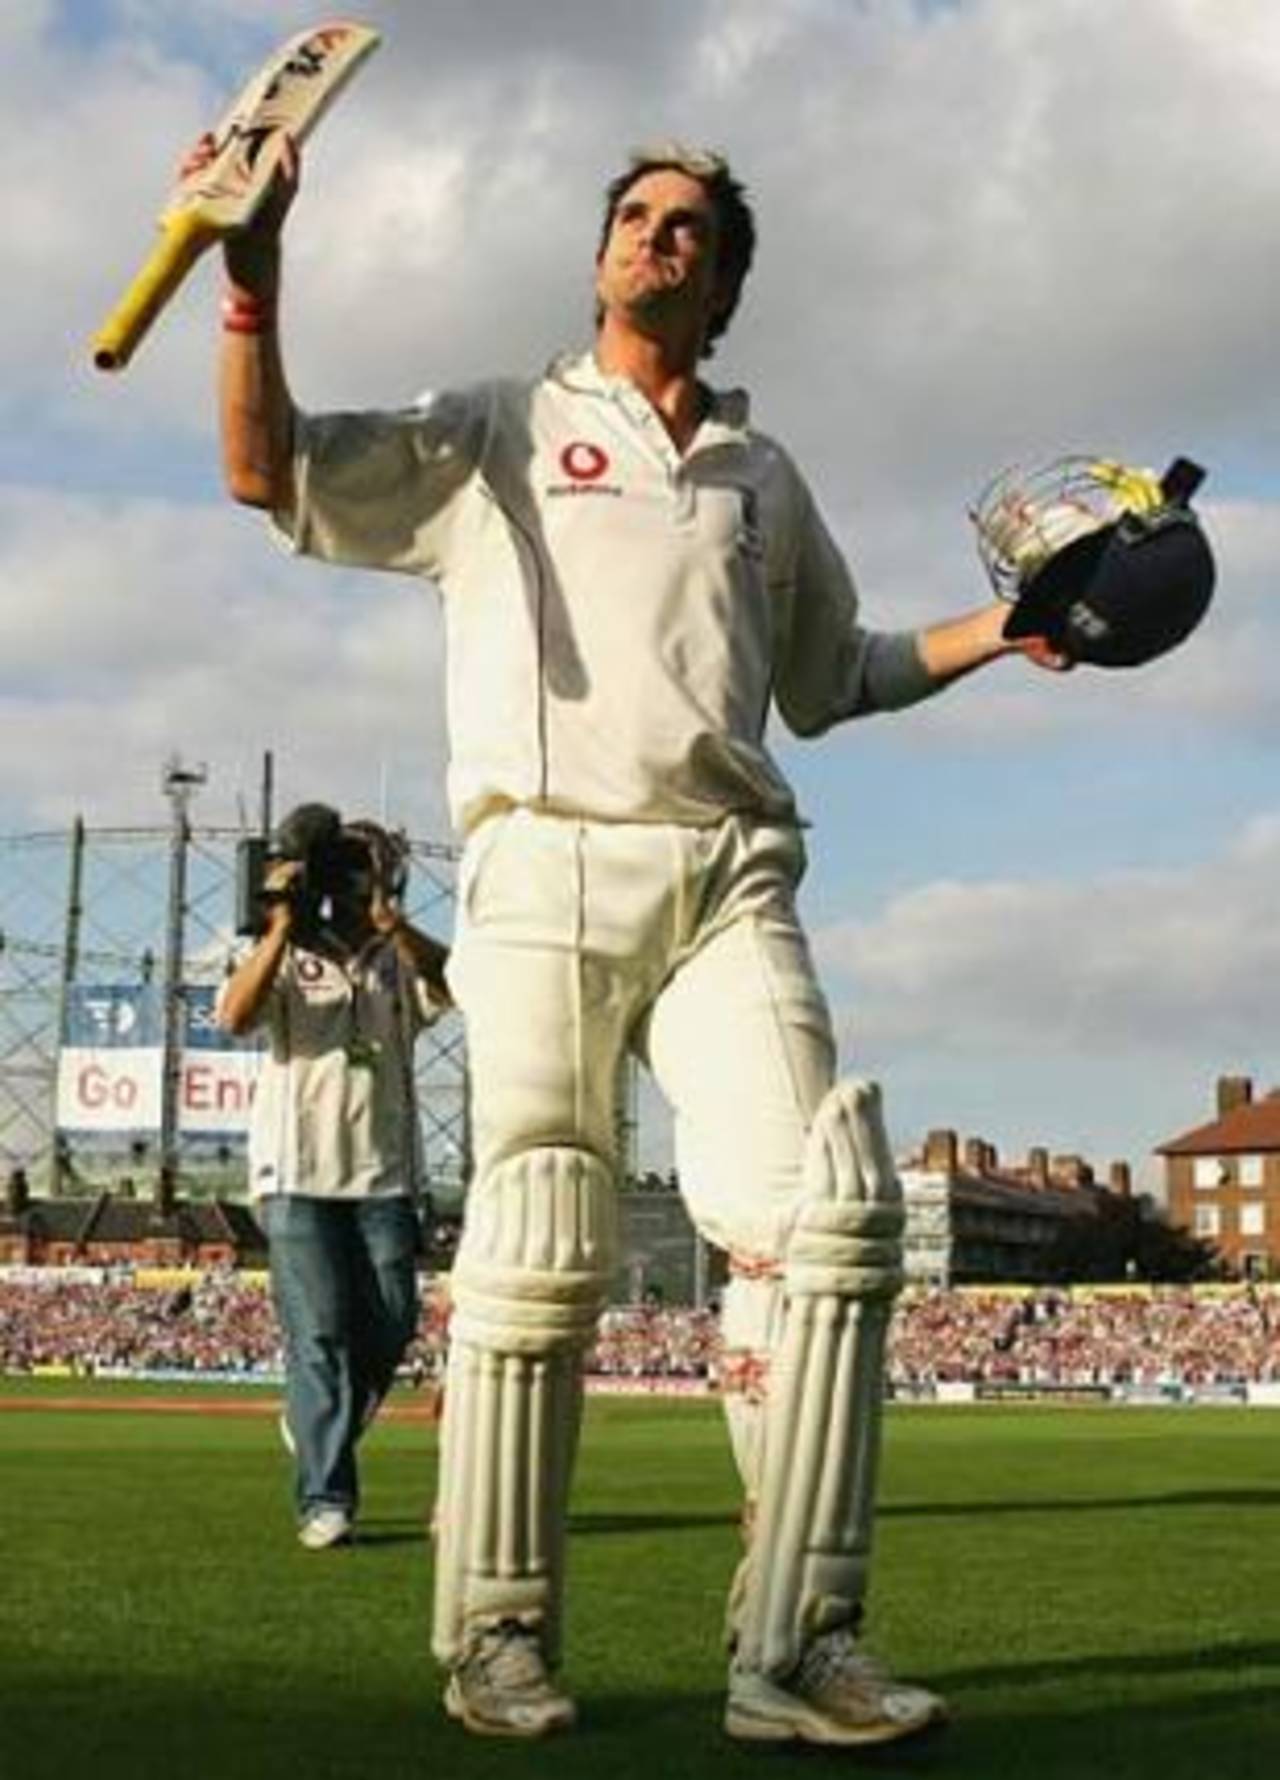 September 12, 2005: Kevin Pietersen basks in the glow of his finest innings - an Ashes-winning hundred at The Oval&nbsp;&nbsp;&bull;&nbsp;&nbsp;Getty Images